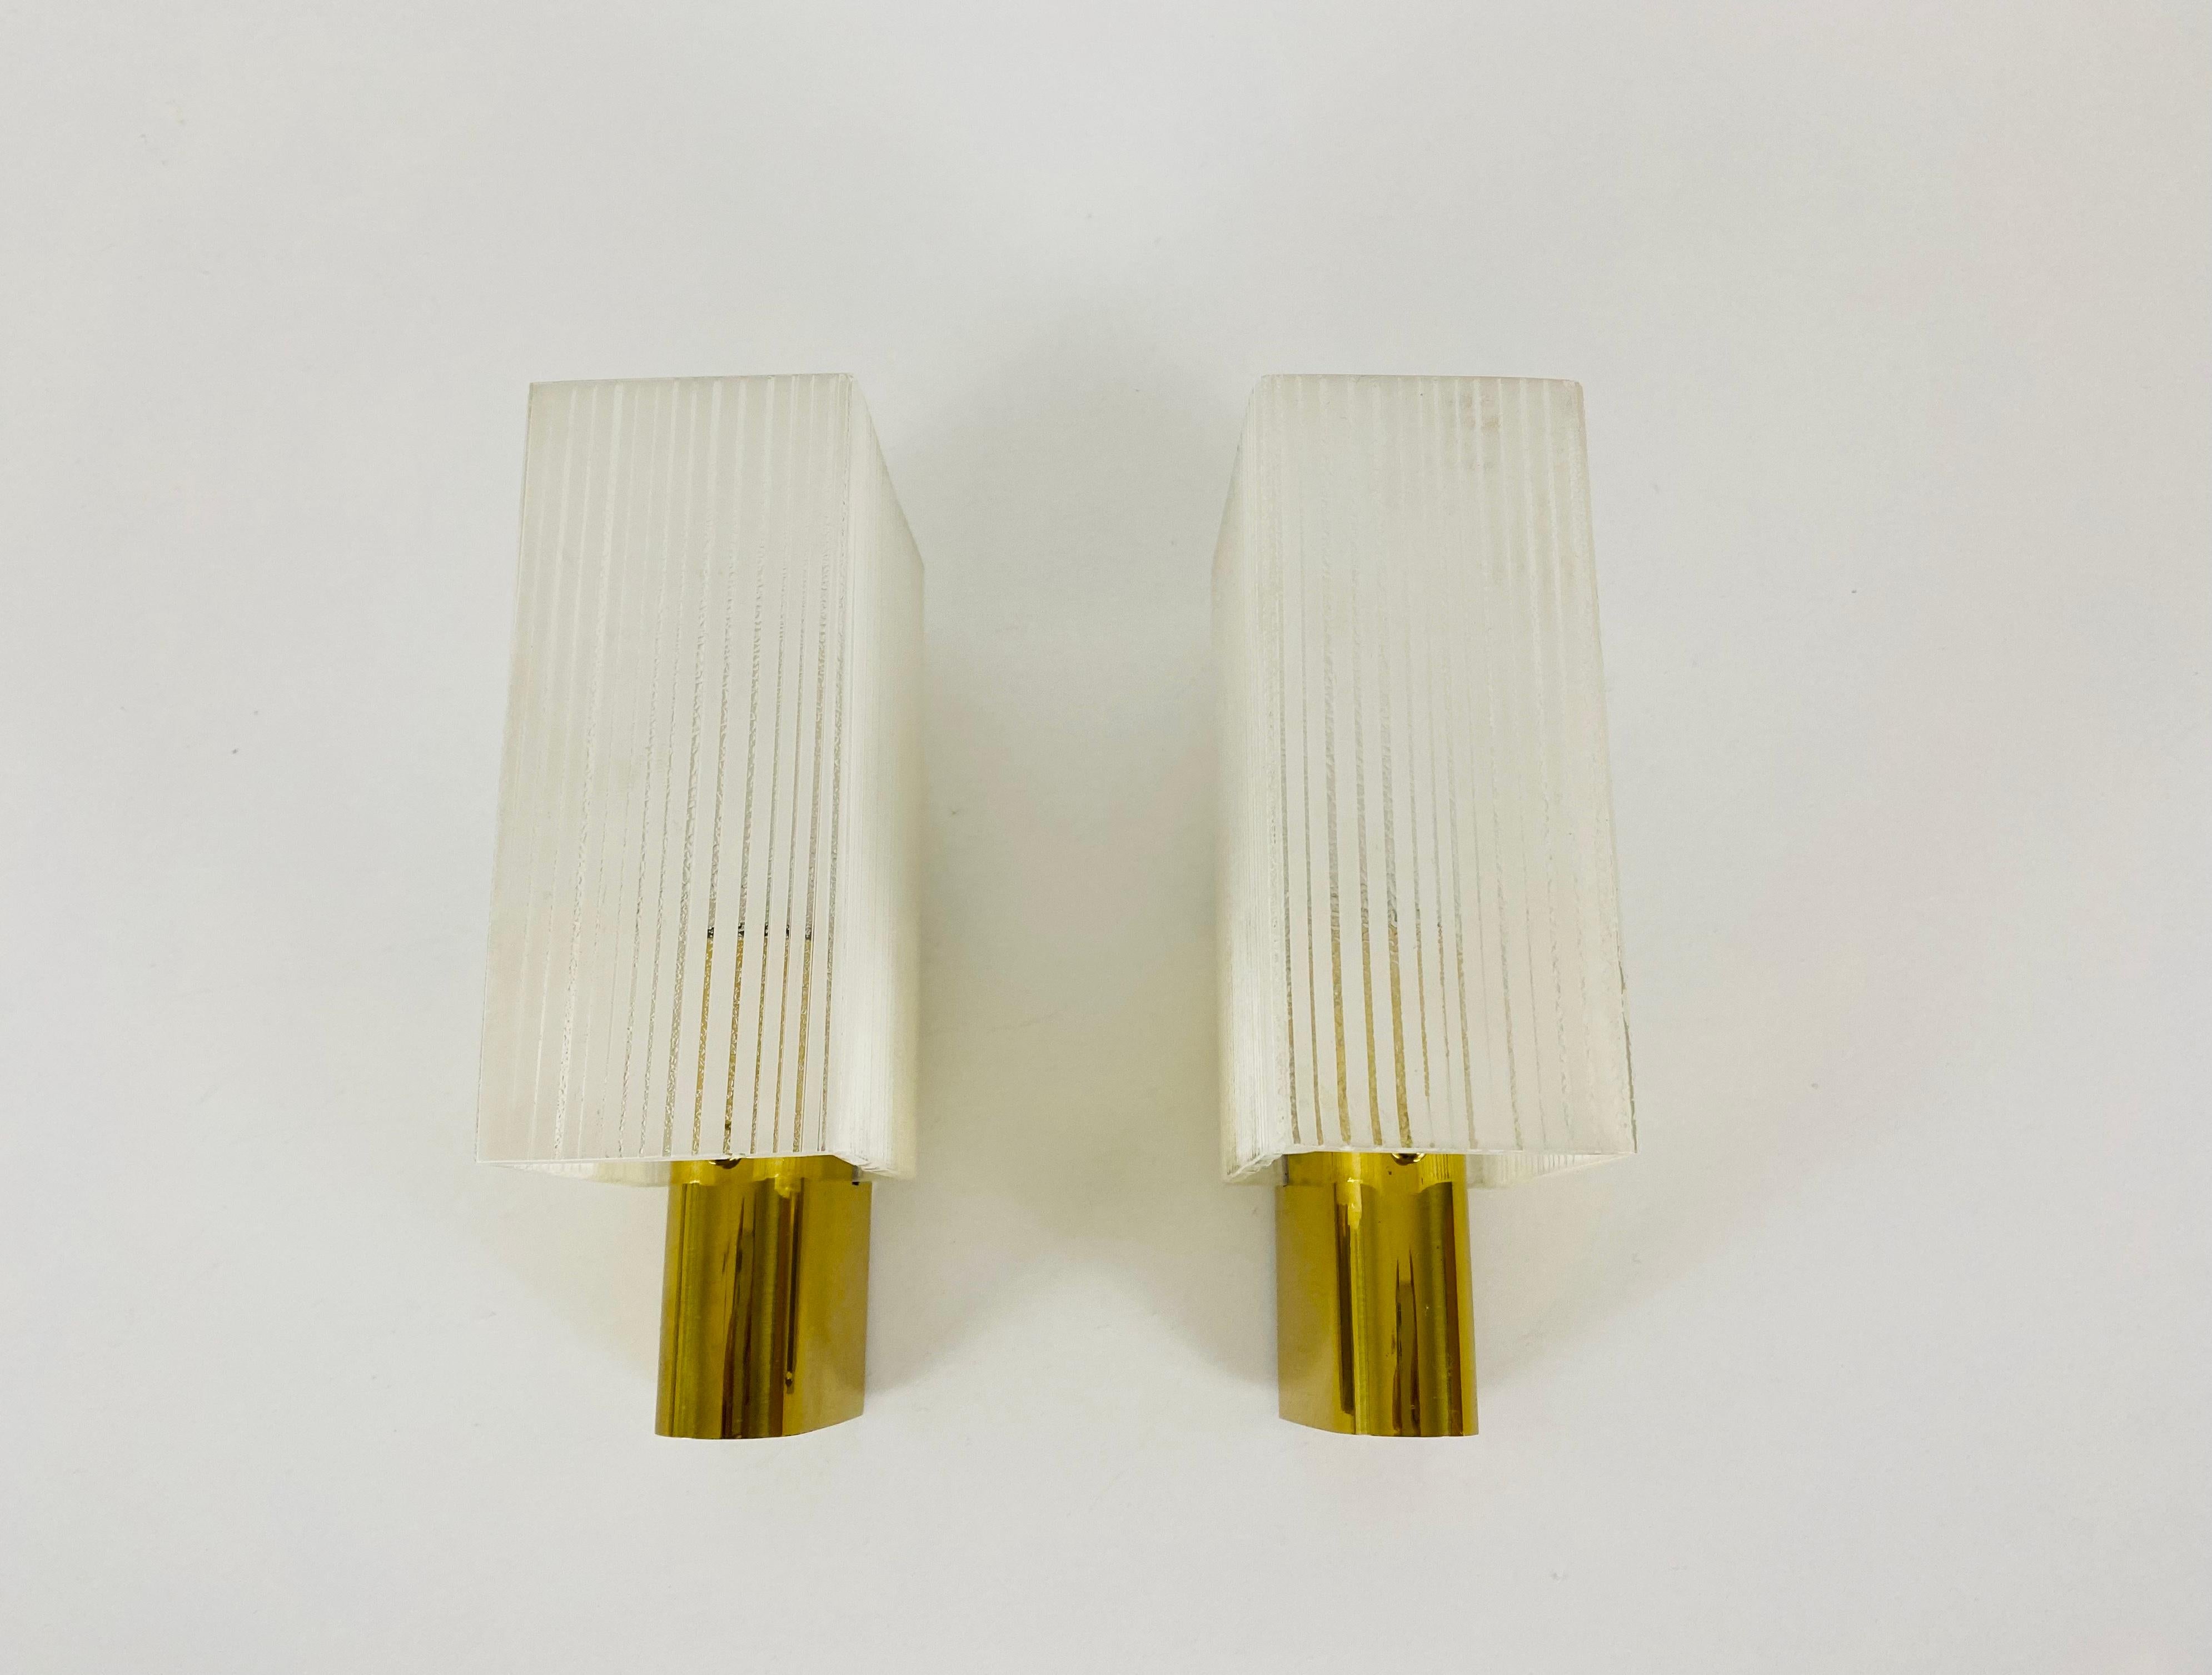 Pair of 2 Brass and Glass Sconces, 1960s, Germany For Sale 8